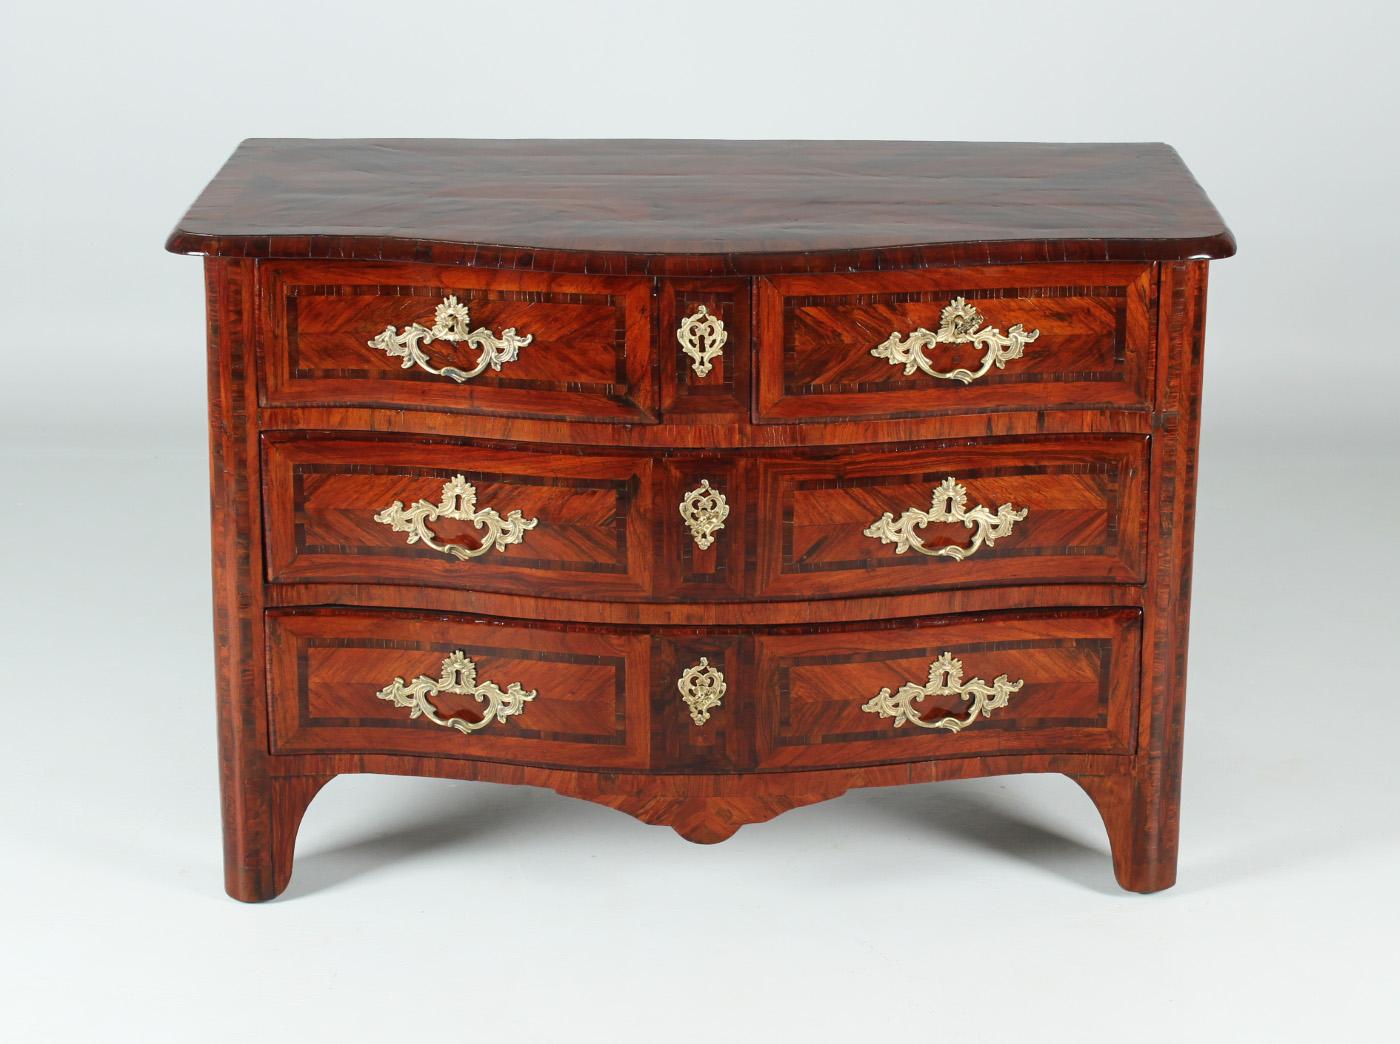 Antique French Louis XV or Baroque Commode

France
Rosewood
Louis XV around 1740

Dimensions: H x W x D: 83 x 121 x 64 cm

Description:
French four-bay chest of drawers from the middle of the 18th century.

Piece of furniture standing on stud feet